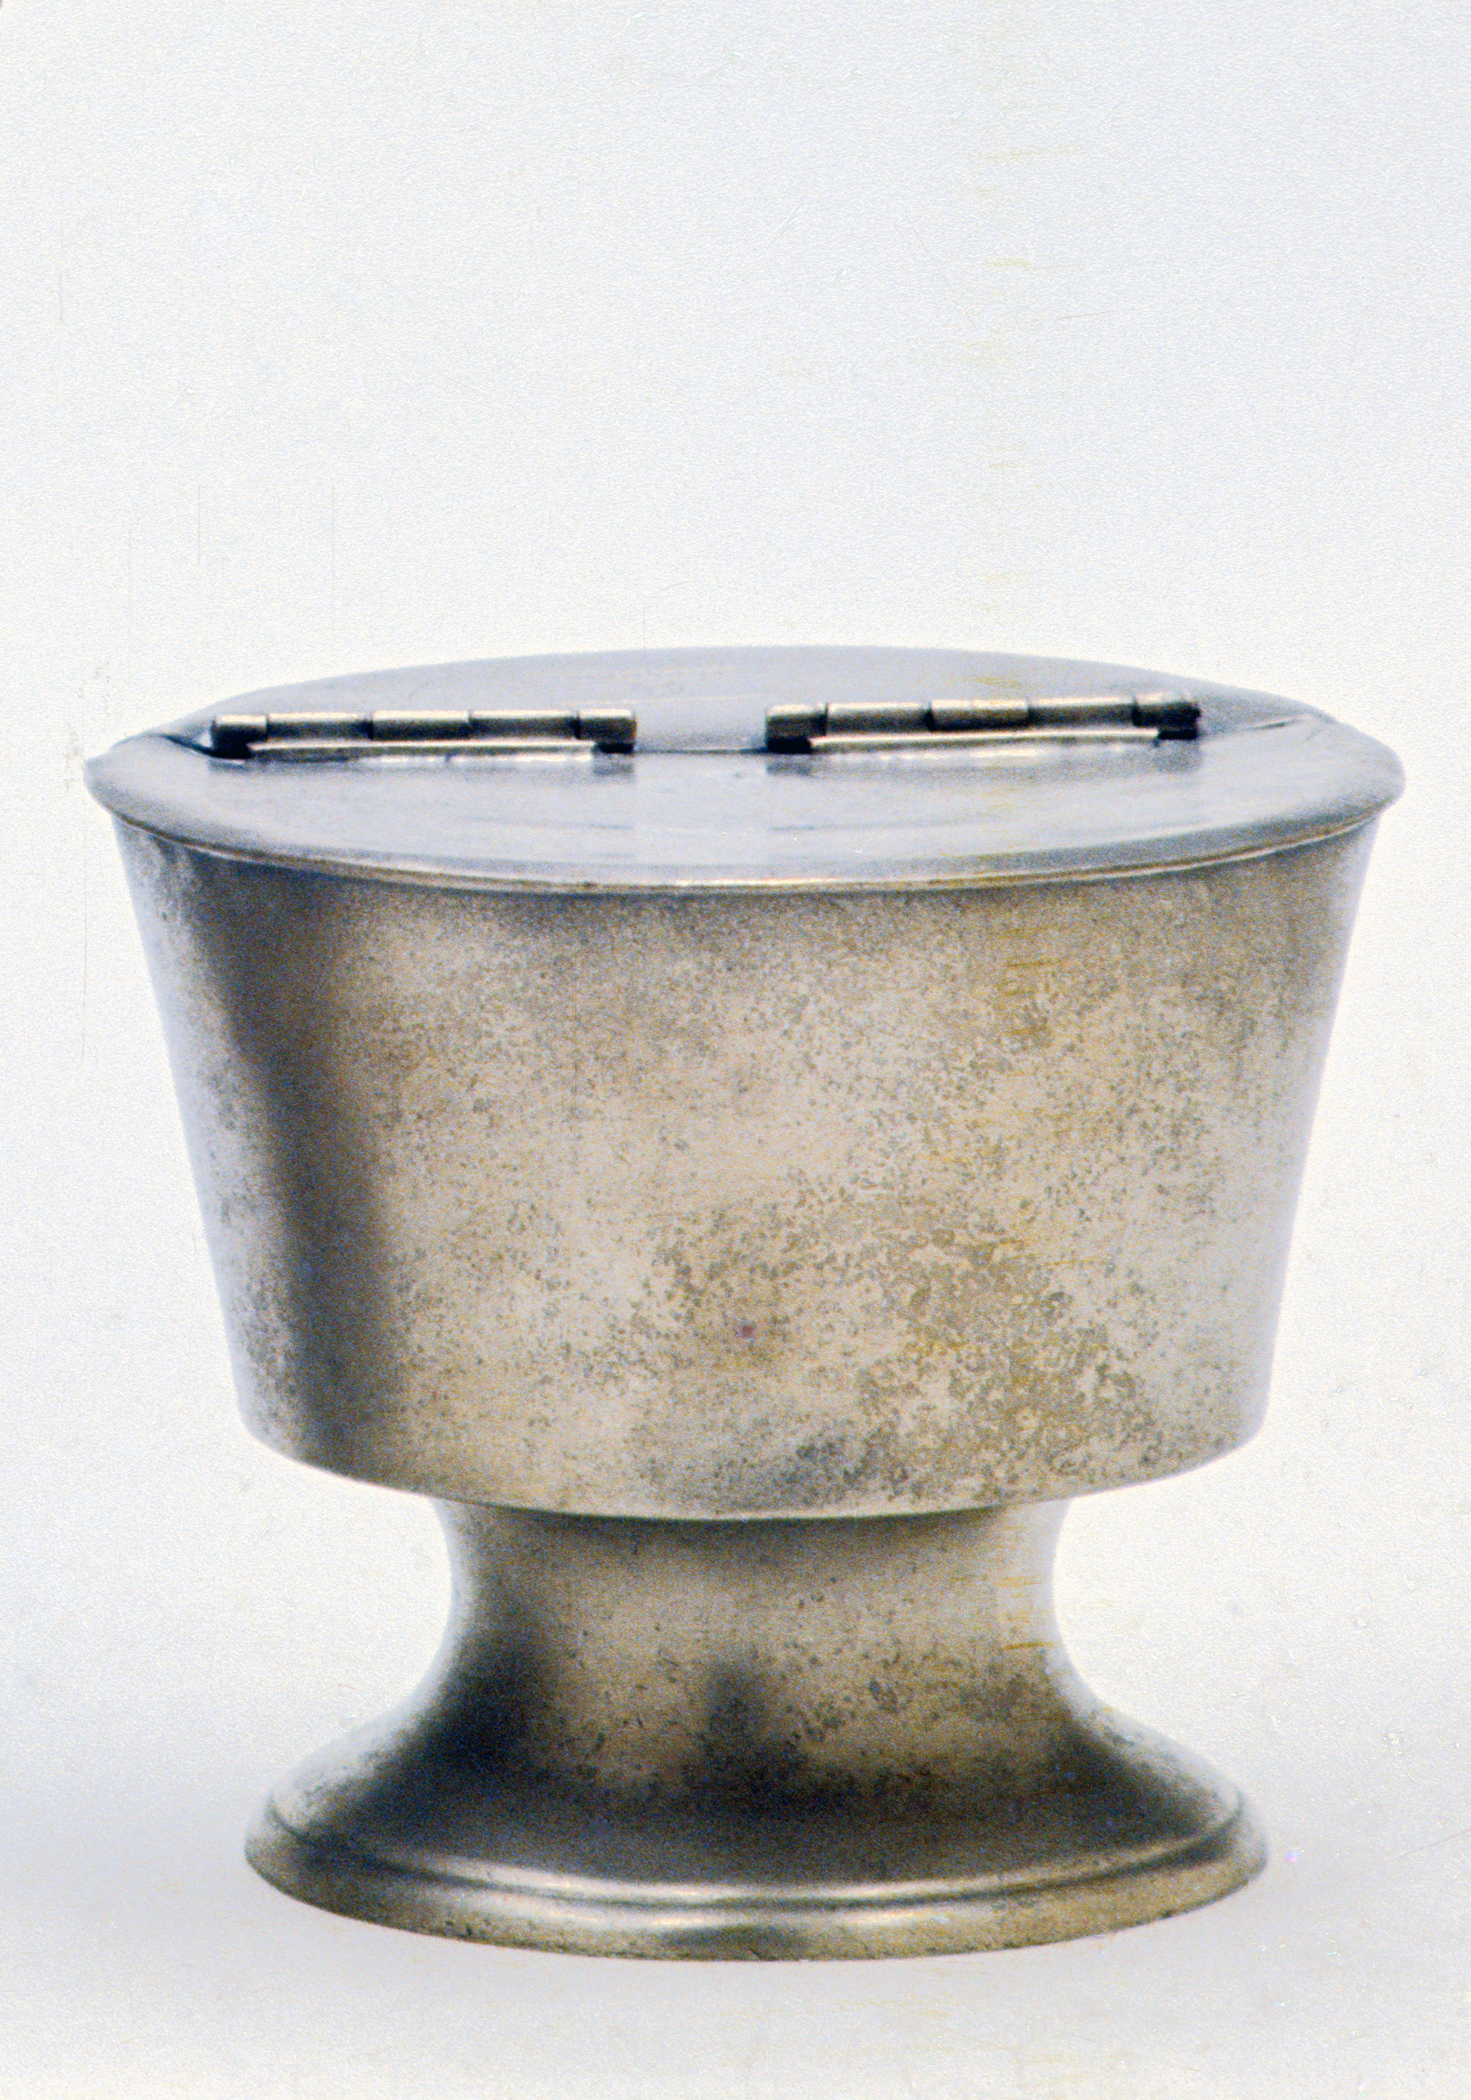 Metals - Bowl and cover